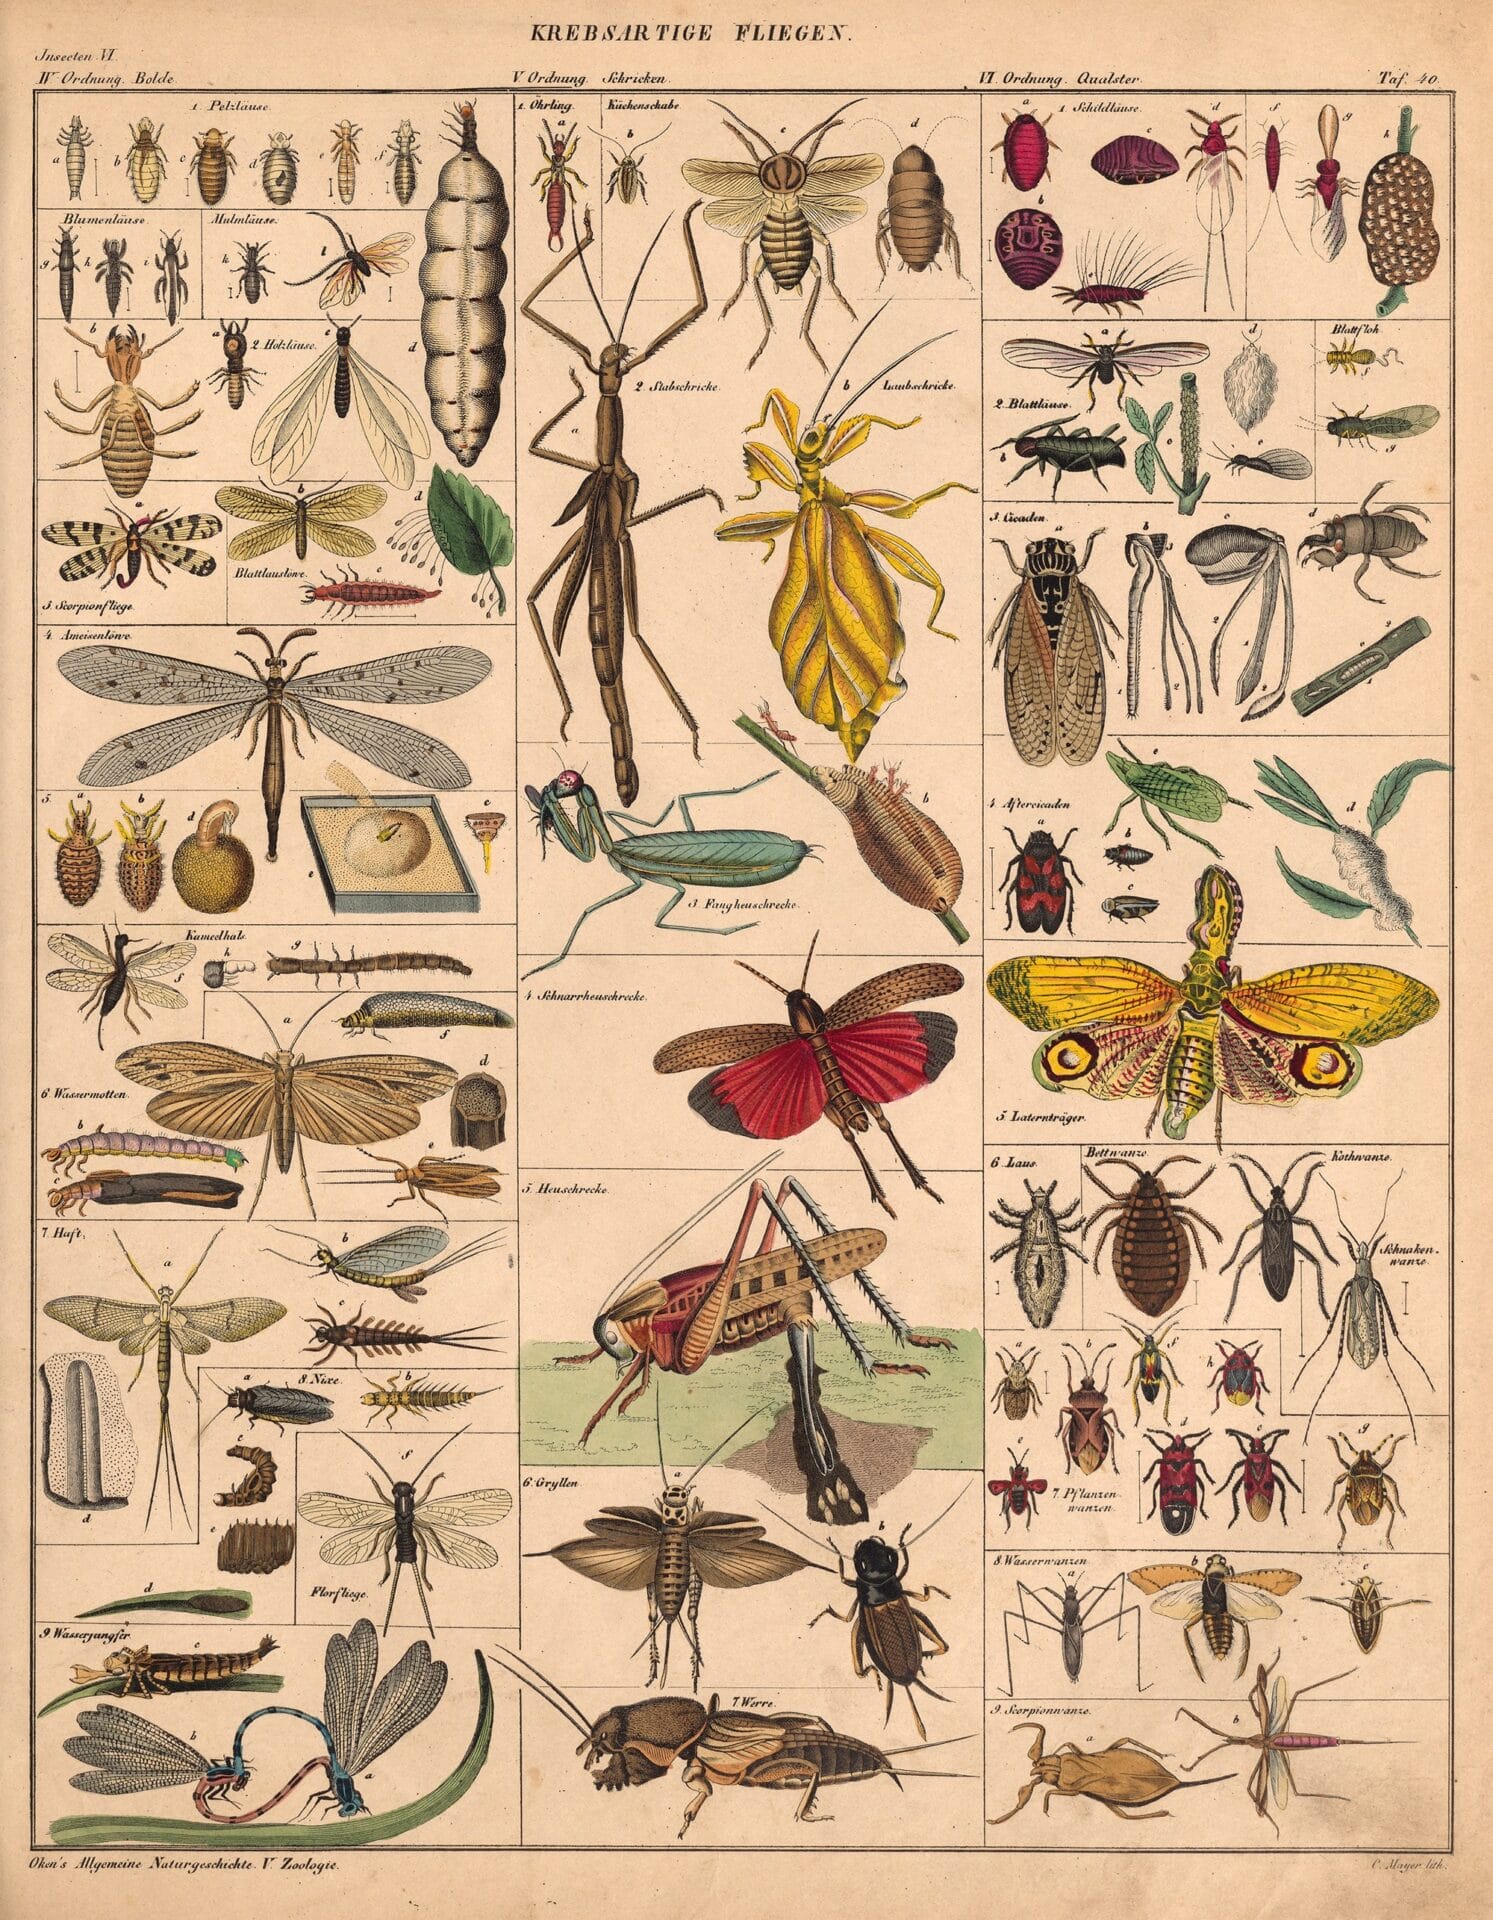 an 18th-century natural history book illustration of winged insects, classified into a grid